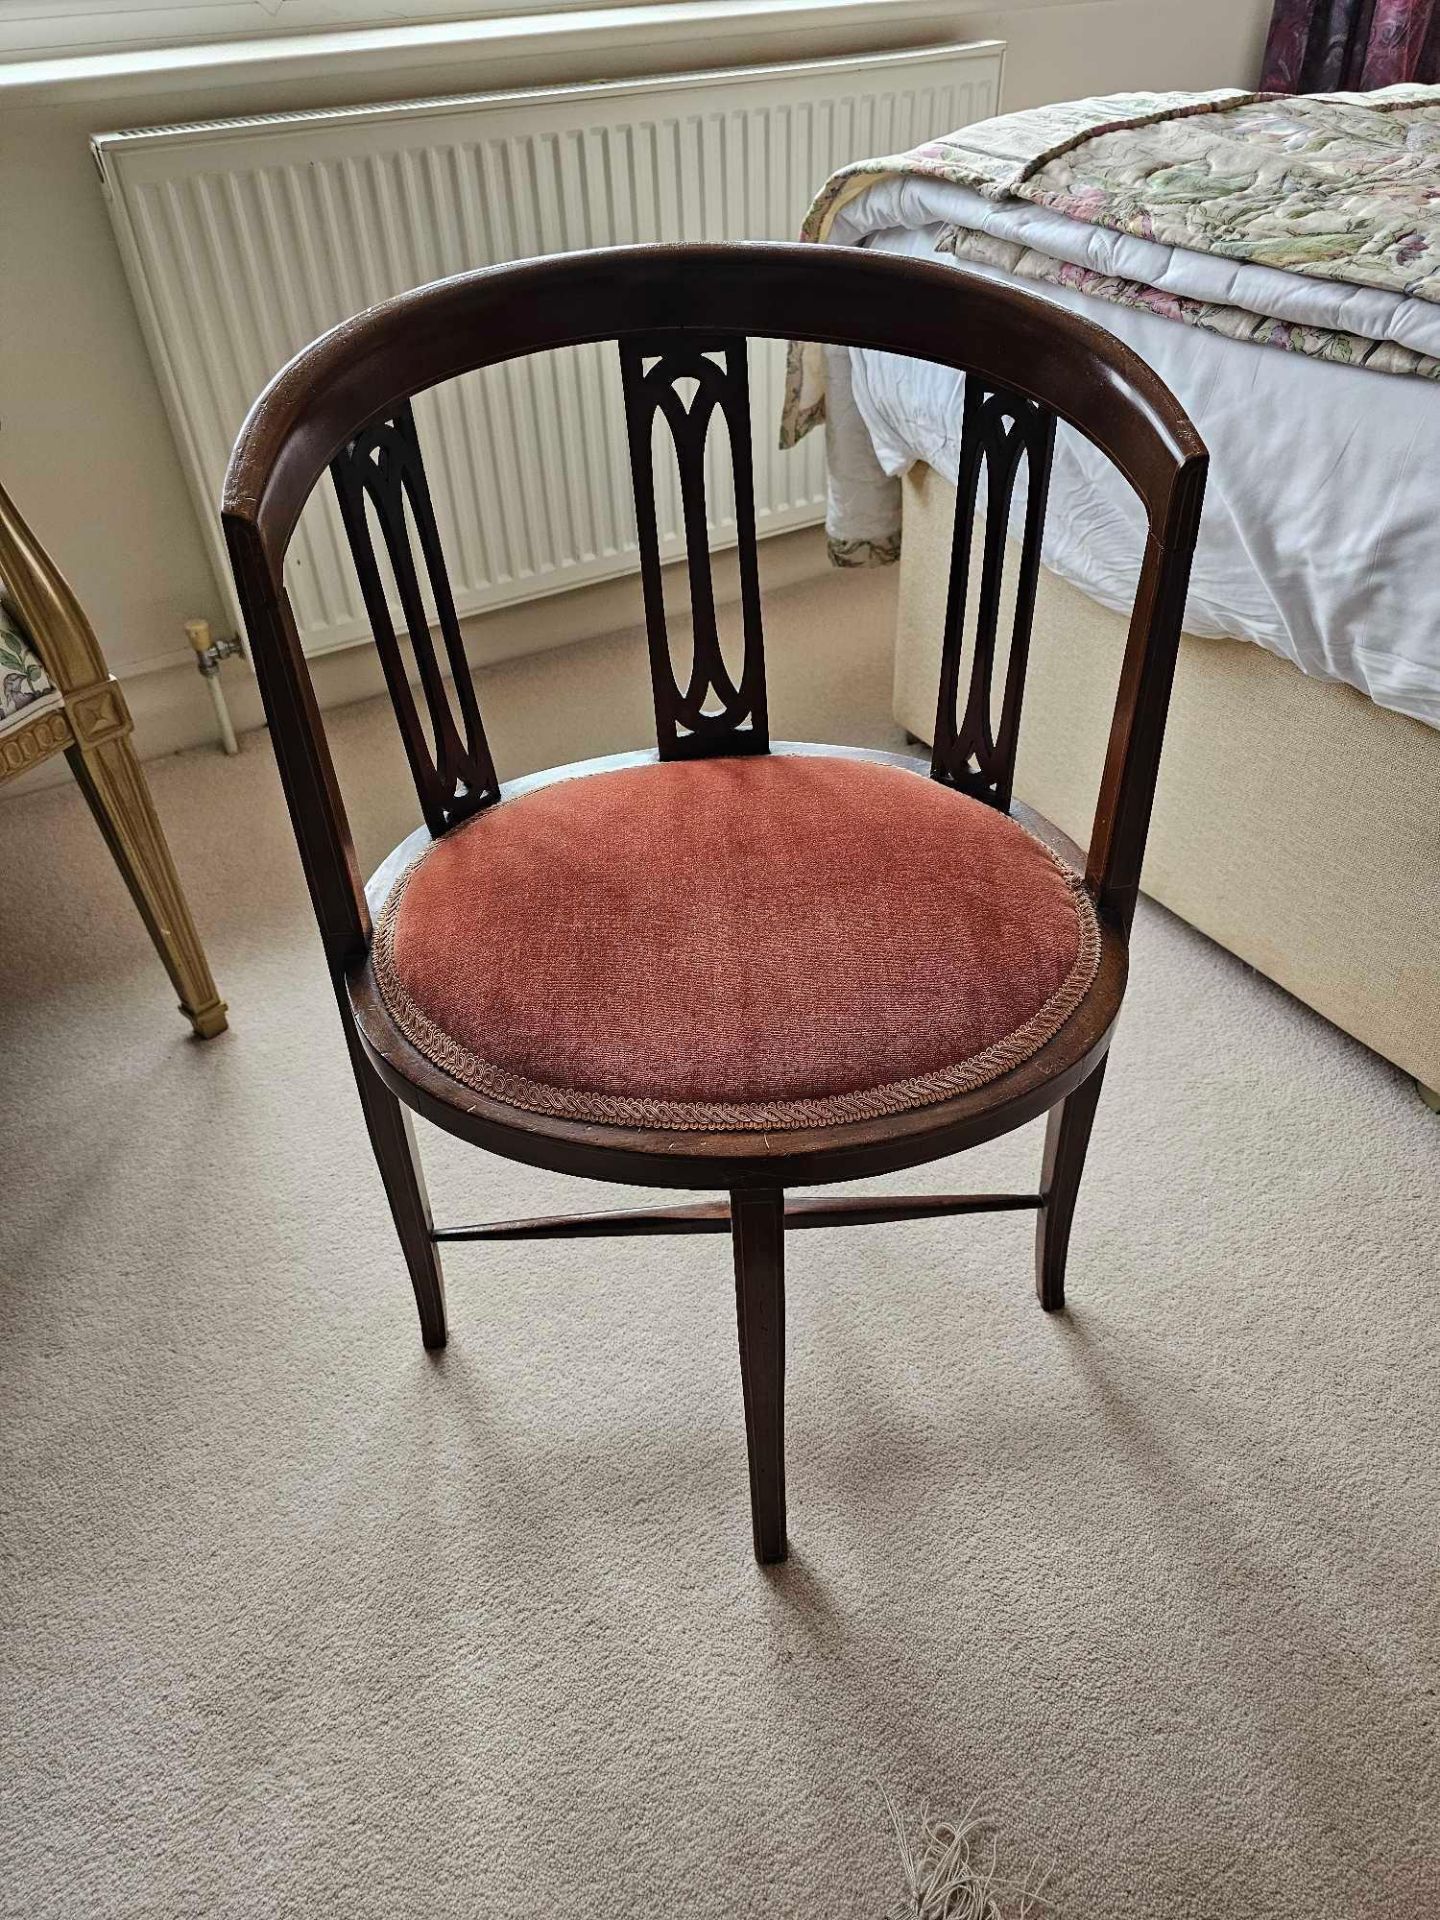 An Edwardian Mahogany Tub Chair A Low Easy Chair, With A Rounded Splat Panel Back, Padded Shaped - Image 2 of 5